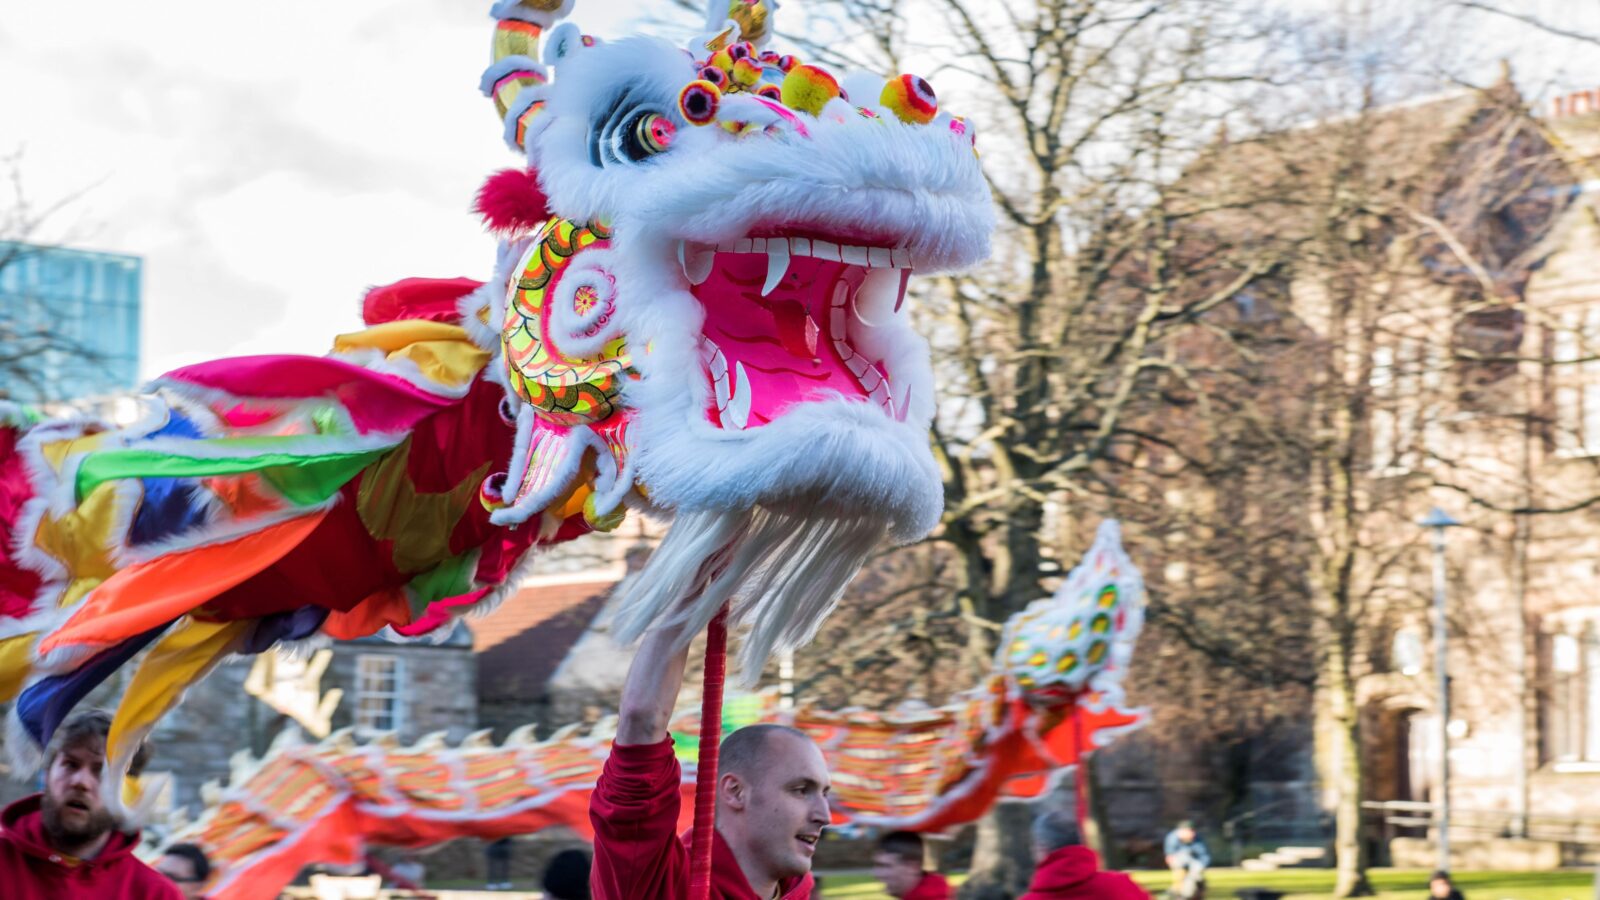 University to mark Lunar New Year with fun-filled events